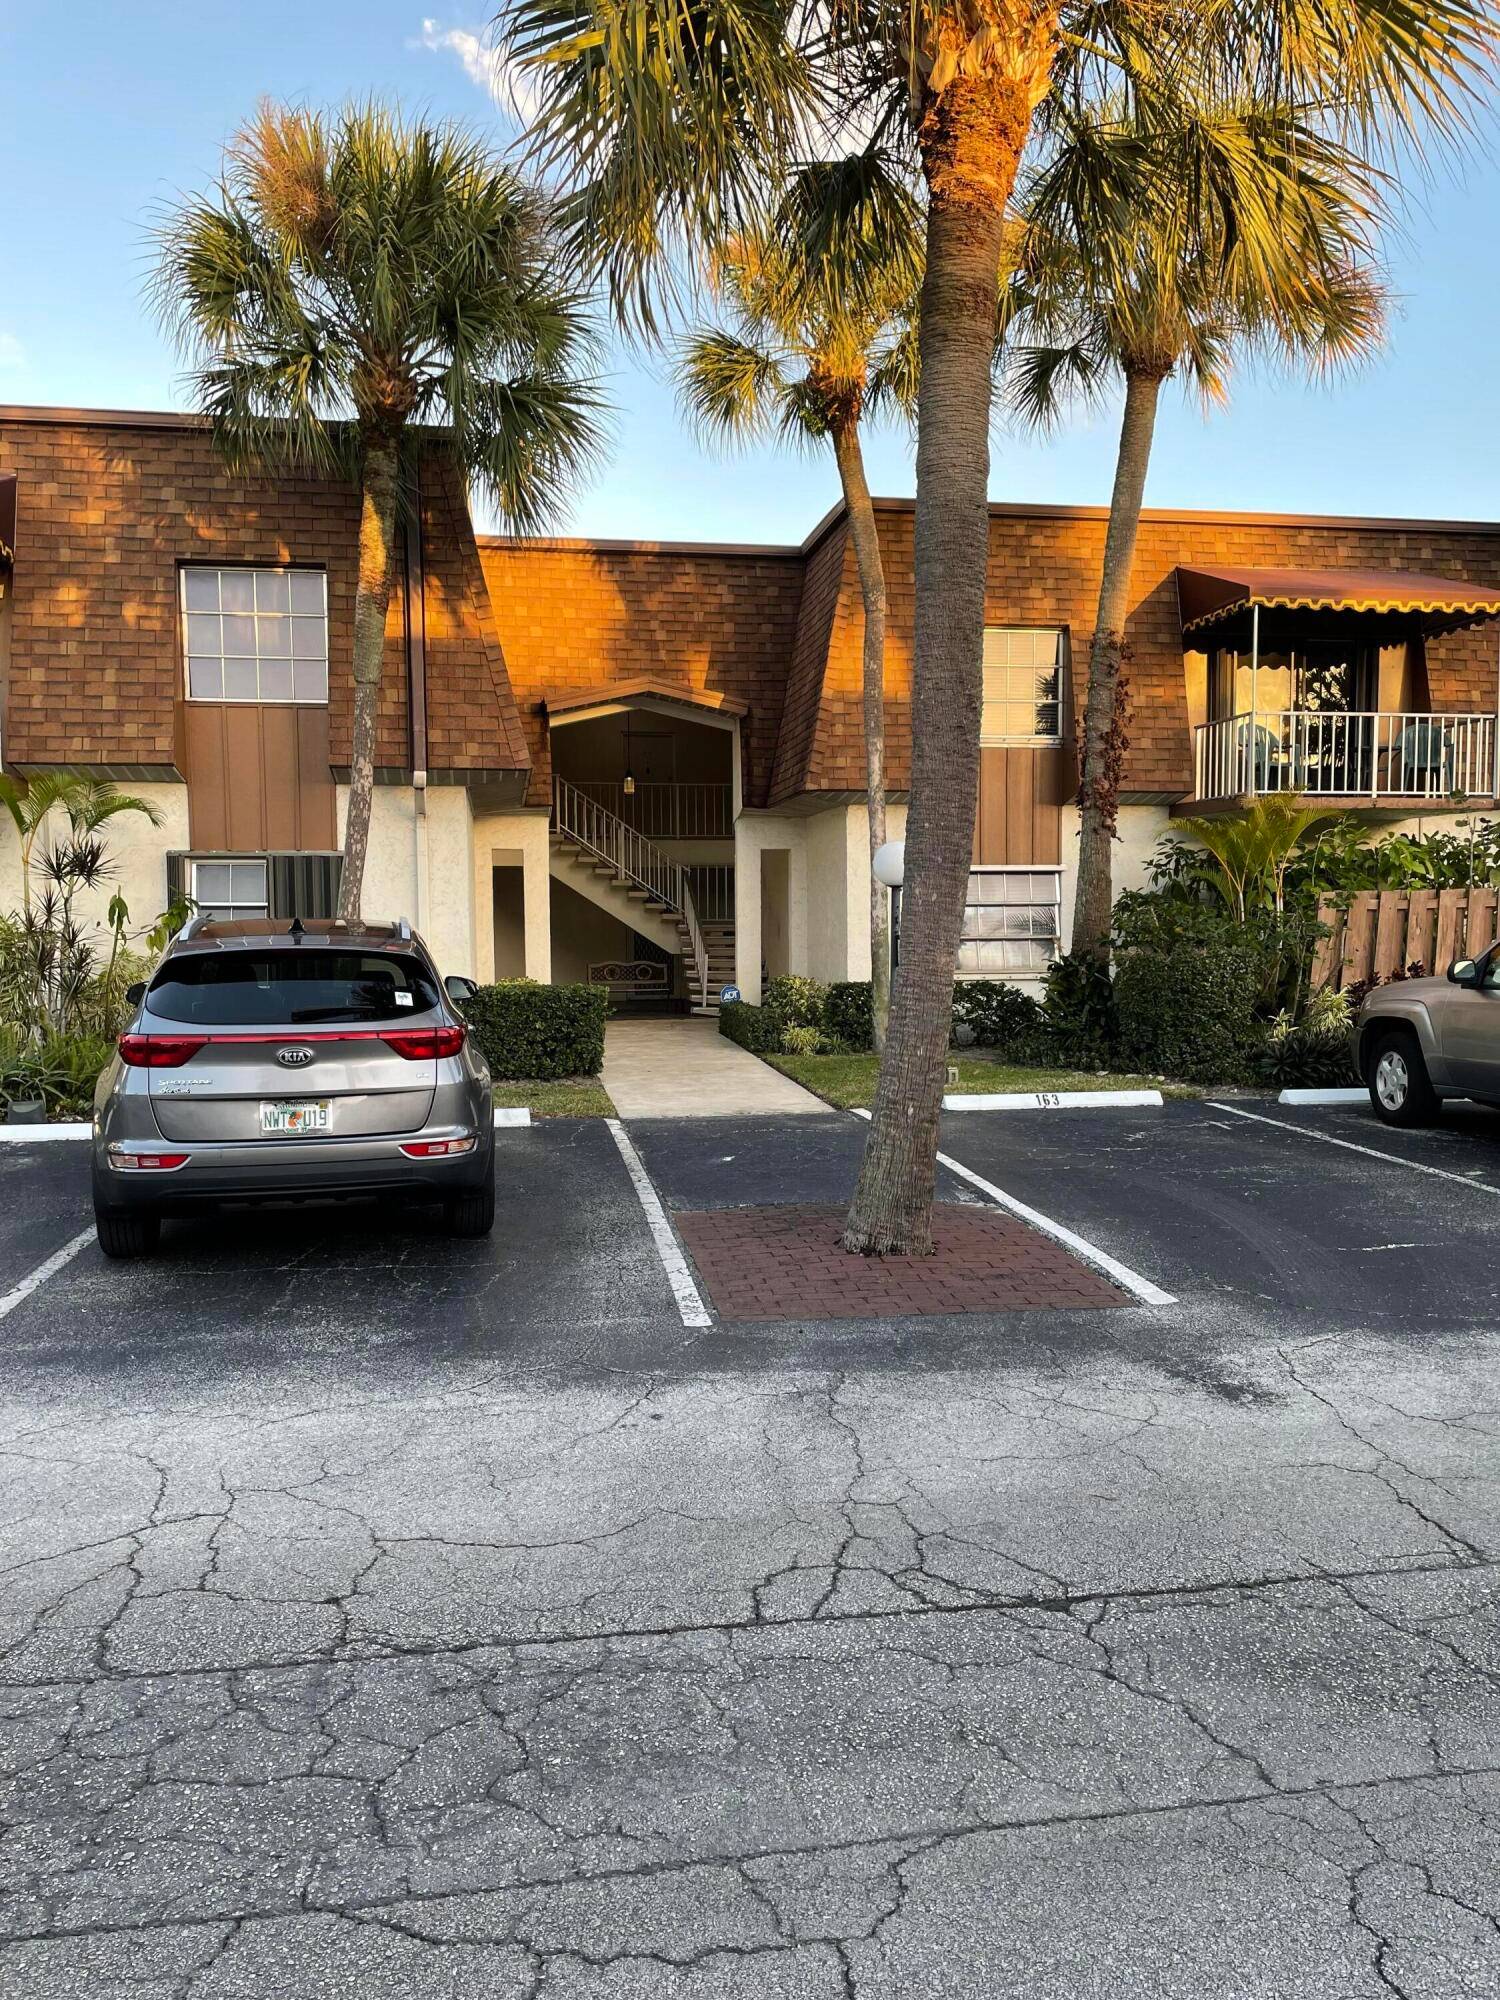 Cute 2 2 Condo in Poppleton Creek located in the heart of downtown Stuart.